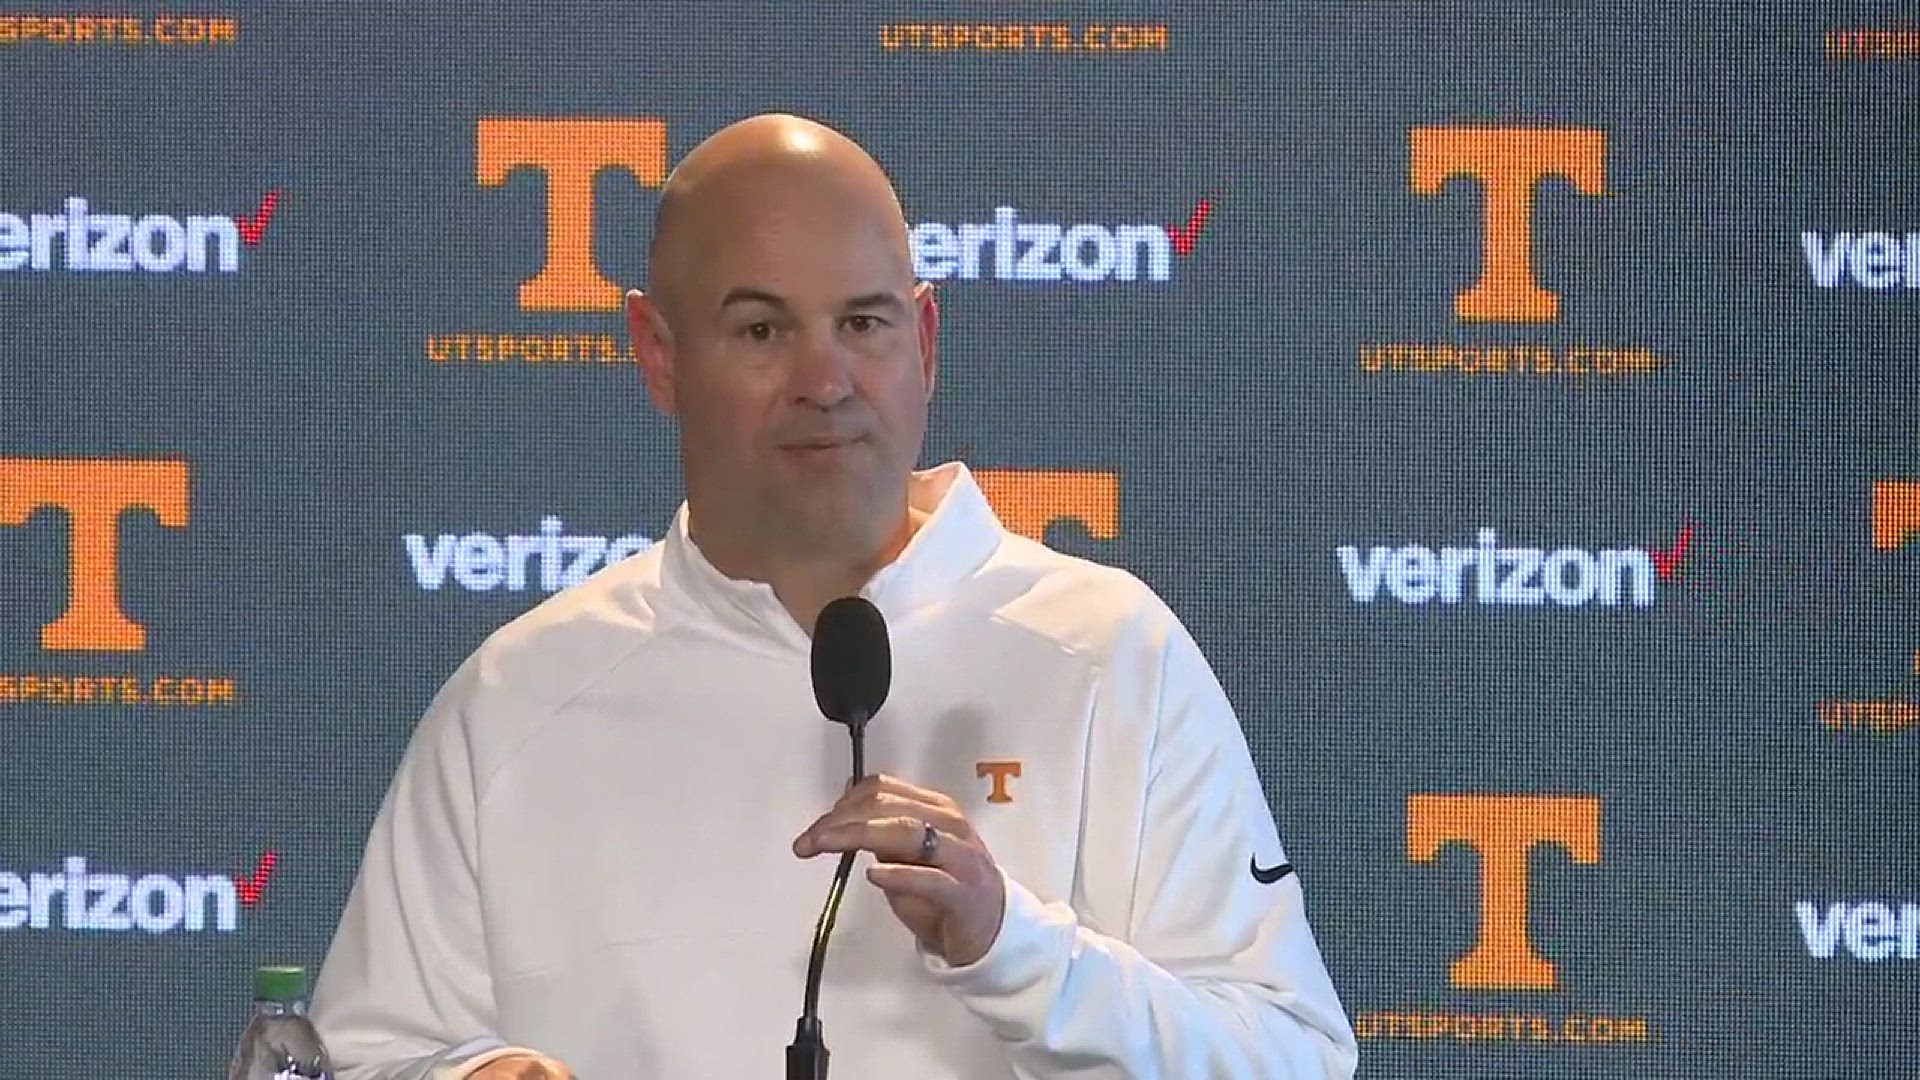 New Vols head coach Jeremy Pruitt said it was important to have good people on his coaching staff to create a family atmosphere. In this video, he shares his connection to each of the guys he's hired to join him in Knoxville.